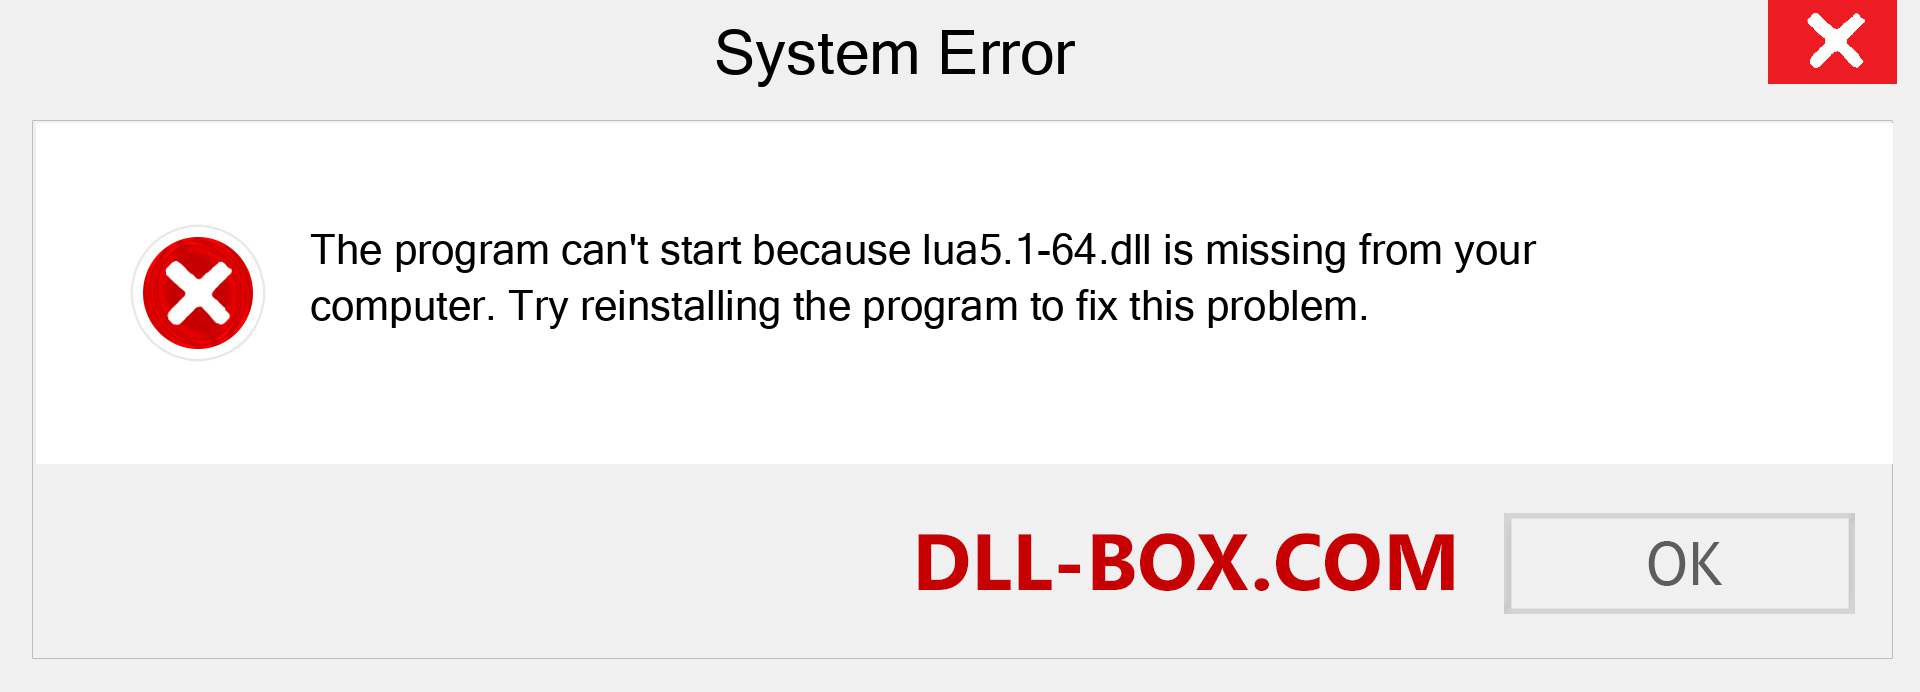  lua5.1-64.dll file is missing?. Download for Windows 7, 8, 10 - Fix  lua5.1-64 dll Missing Error on Windows, photos, images